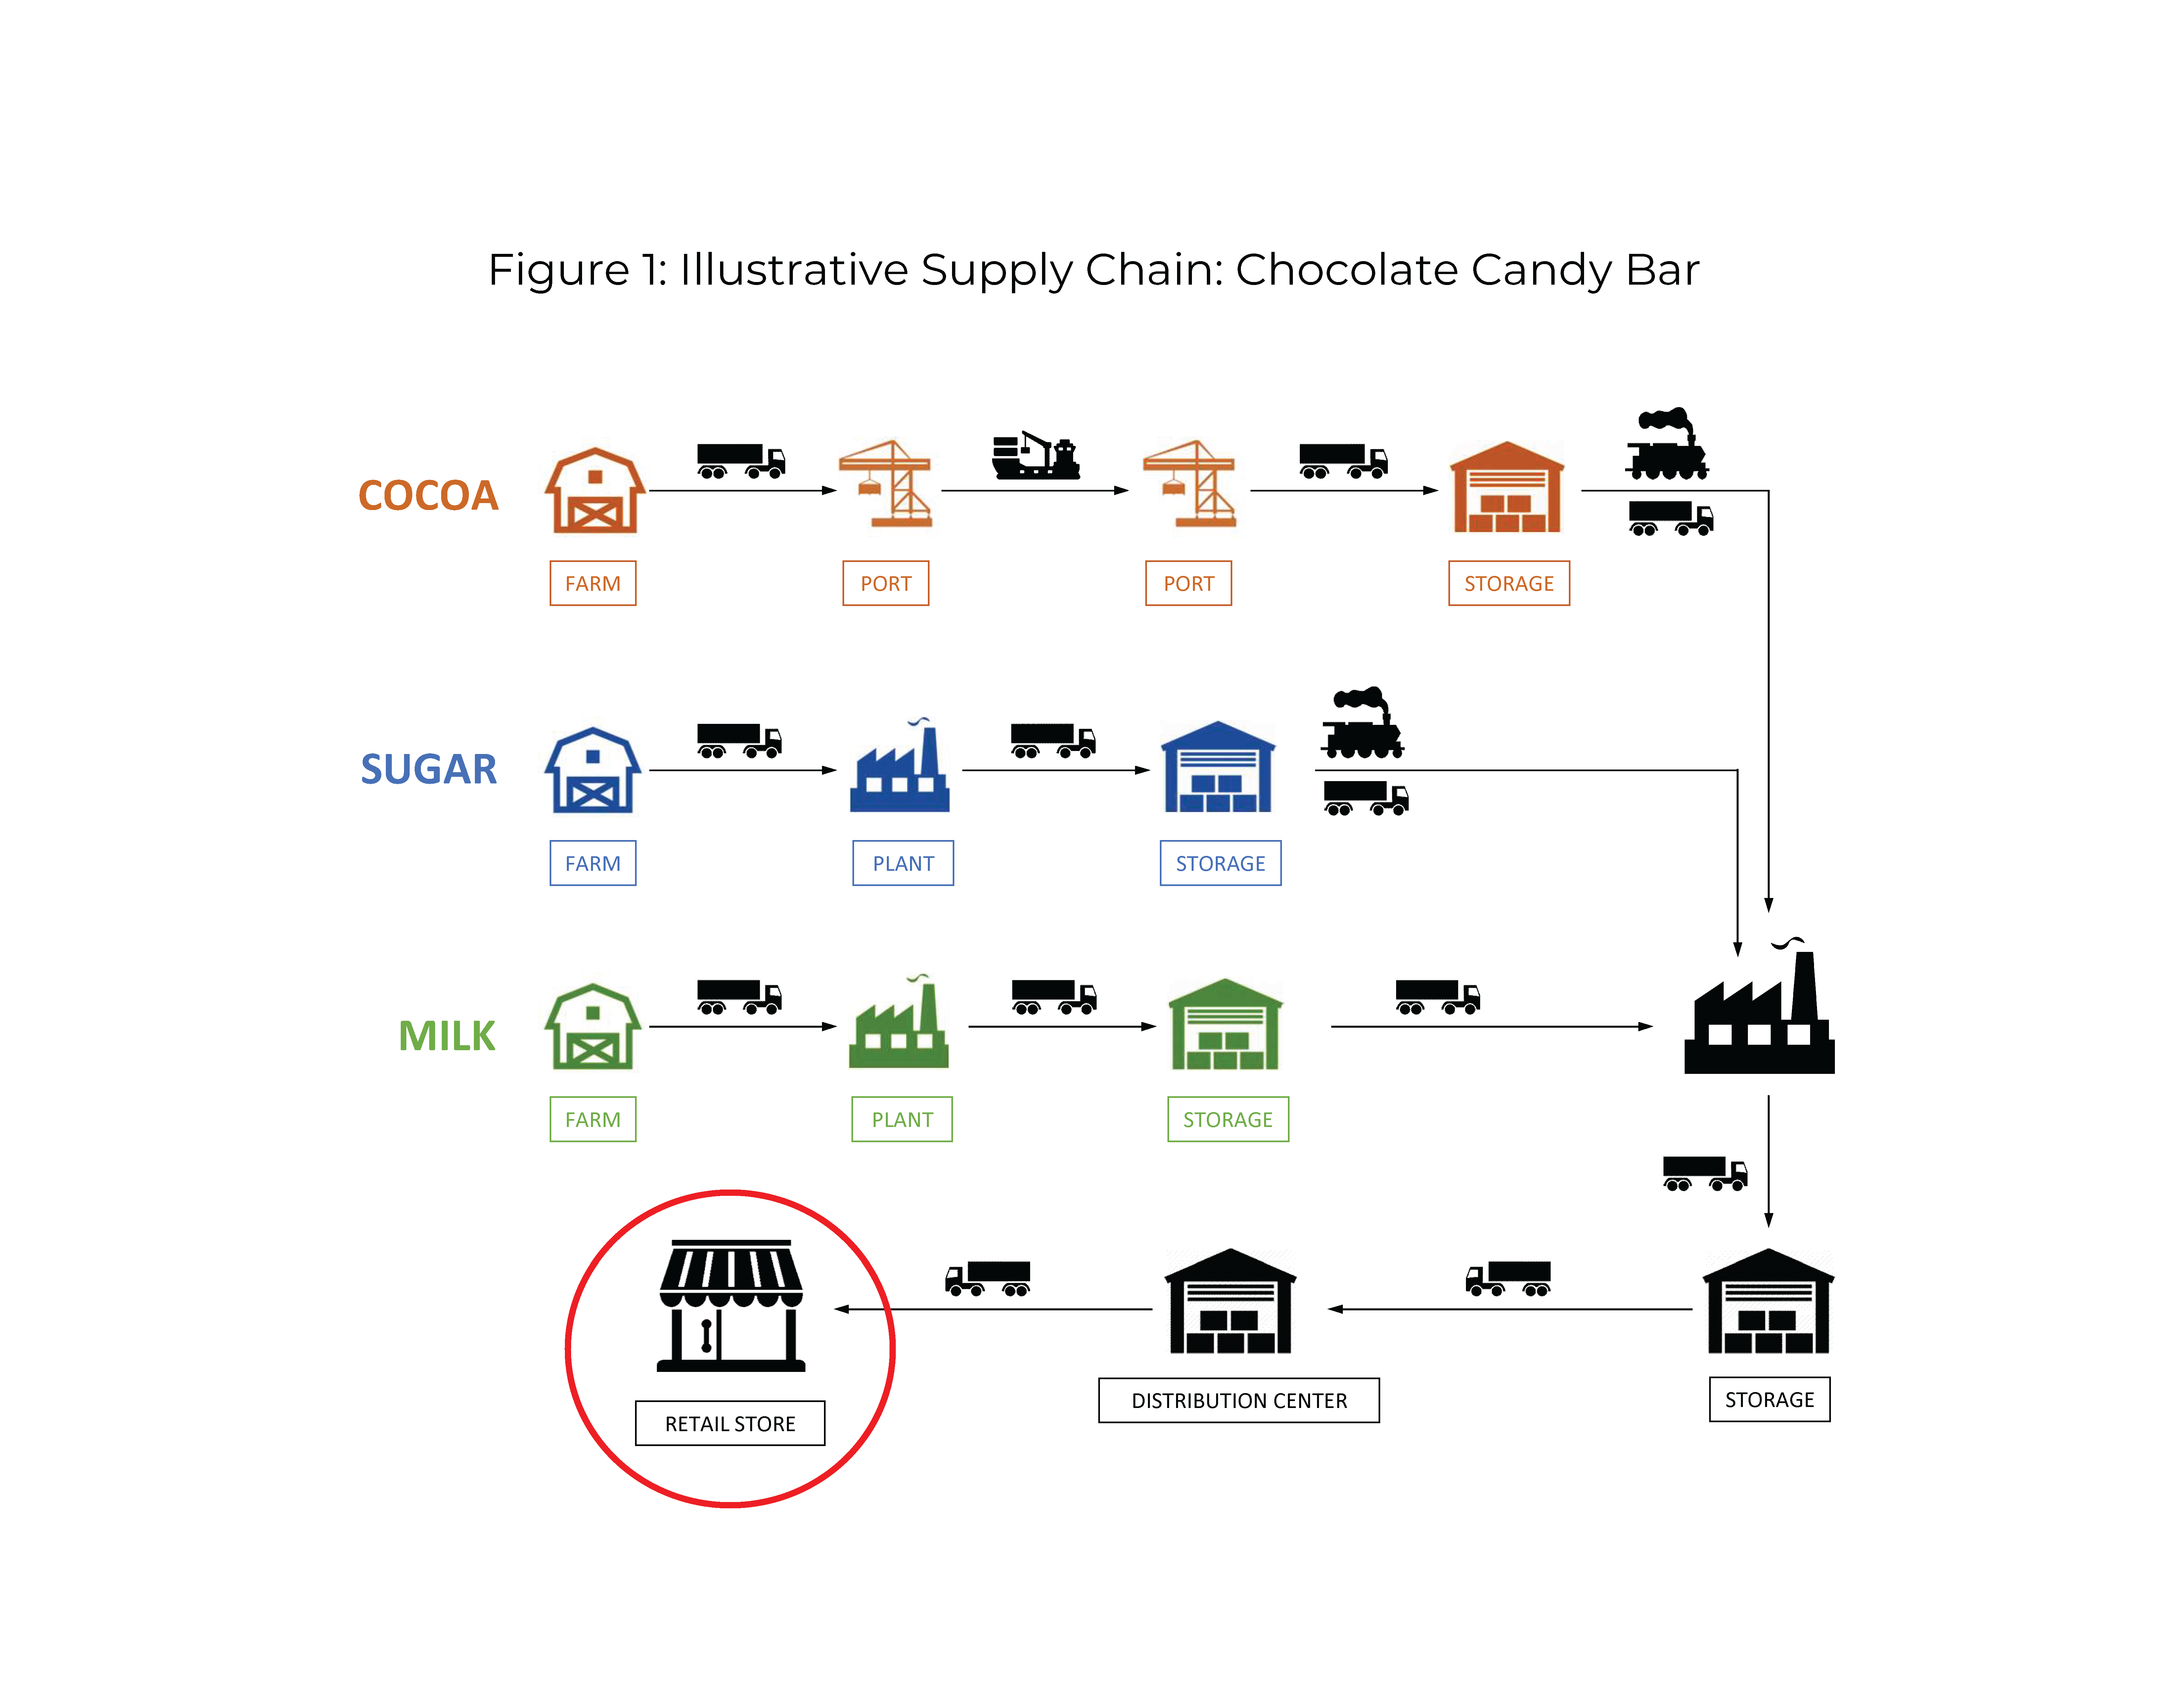 Figure 1 is an illustrated diagram depicting how cocoa, sugar, and milk is transported to production, ports, storage, distribution and finally retail.